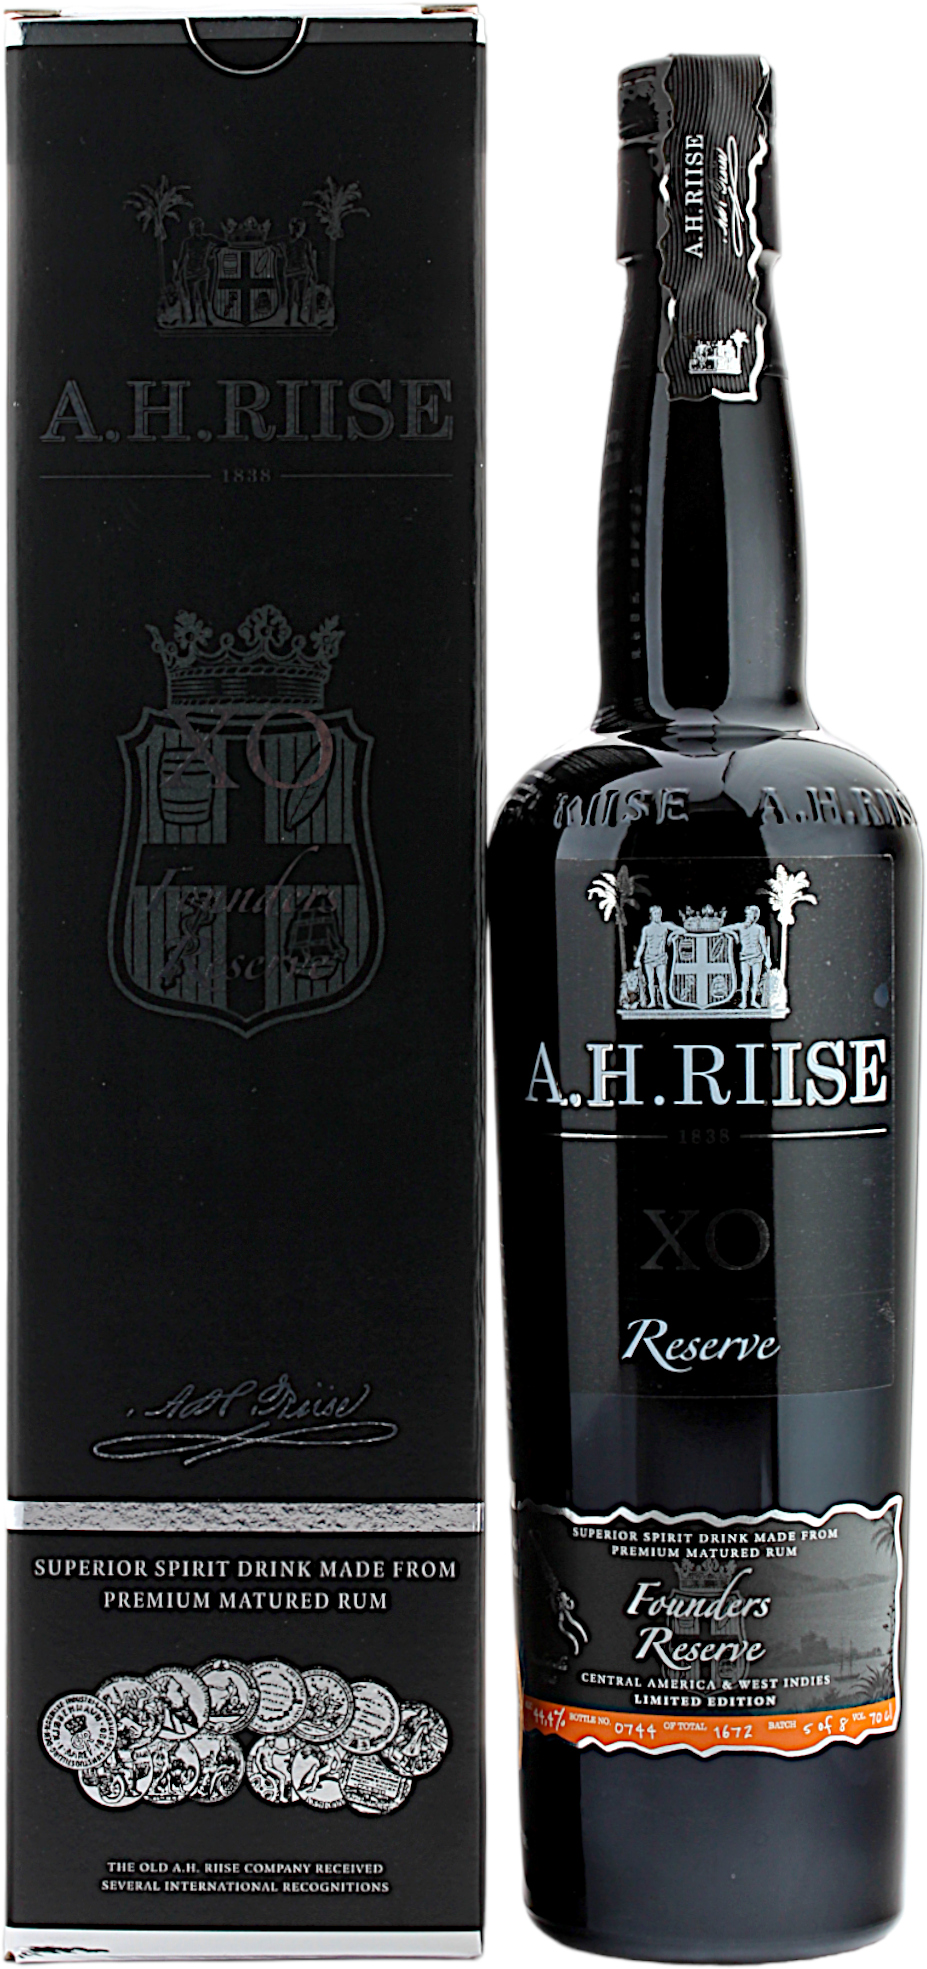 A.H. Riise XO Founders Reserve Collector's Edition 5 44.4% 0,7l